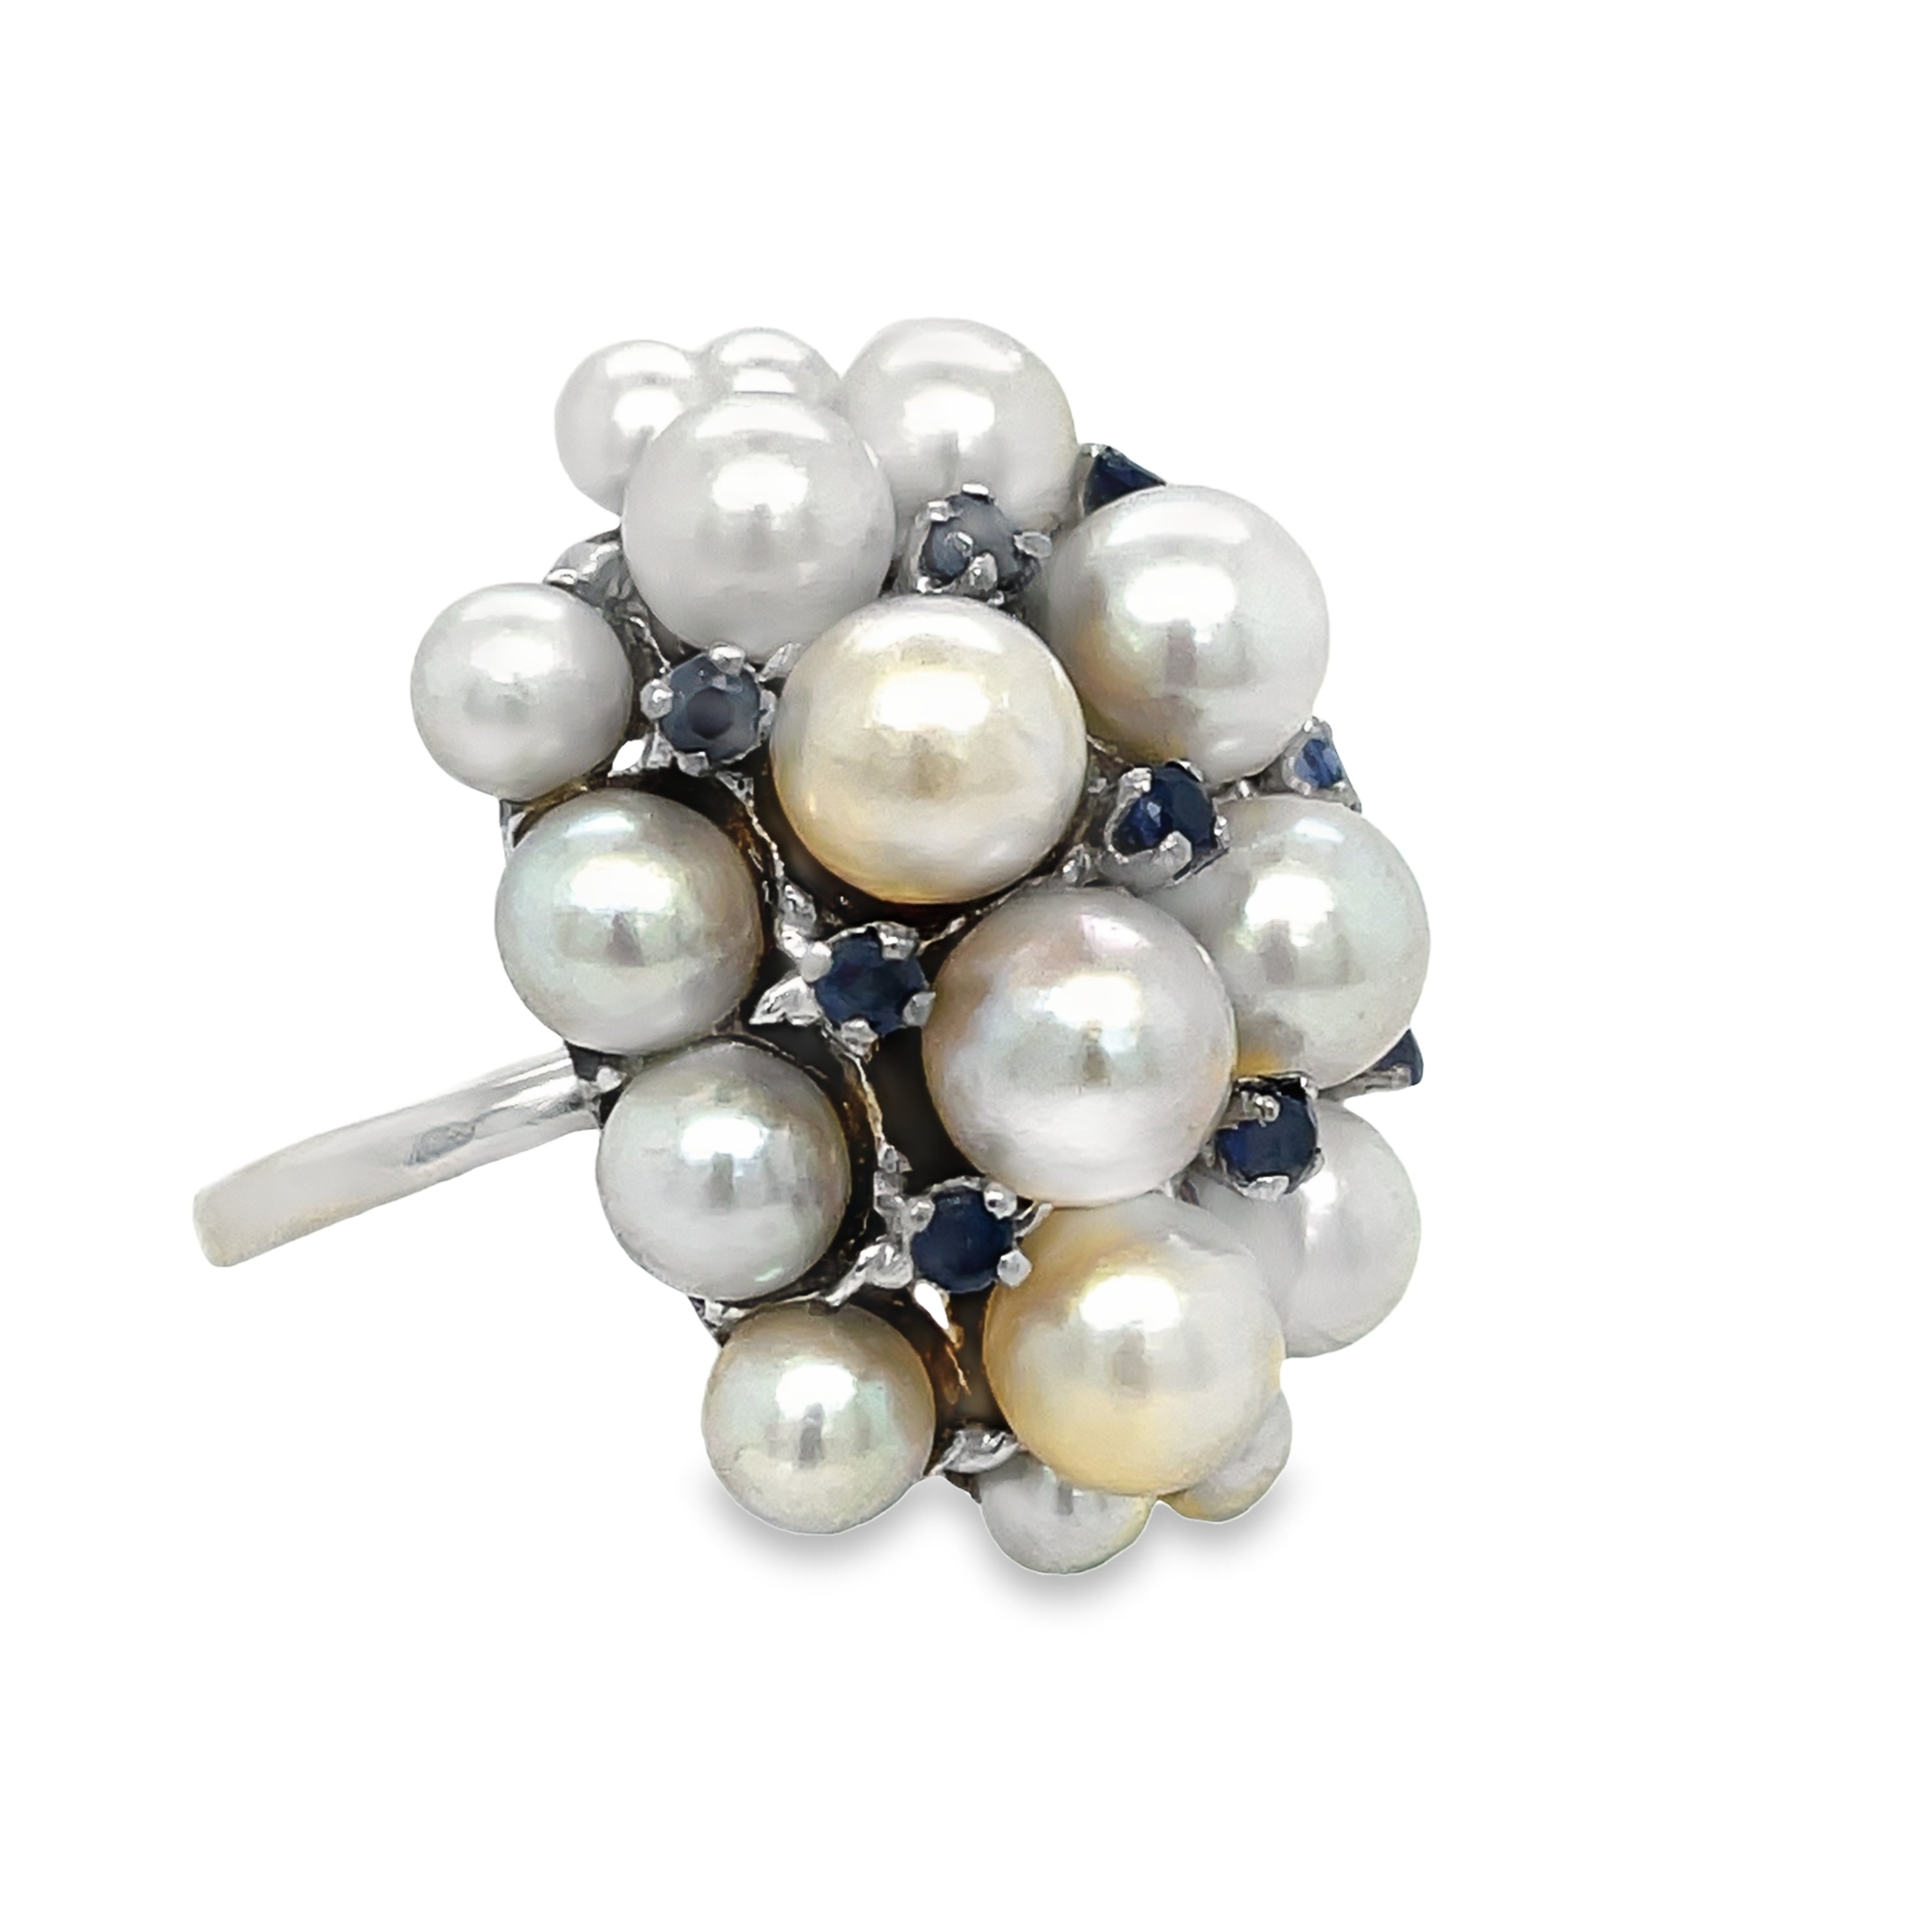 This stunning ring features a cluster of lustrous pearls and dazzling sapphires set in 14k white gold. With a 5.5 size, this piece is the perfect addition to any estate collection. The mixture of small and large pearls adds depth and texture, while the round sapphires bring a touch of elegance. Elevate your style with this unique and timeless ring.